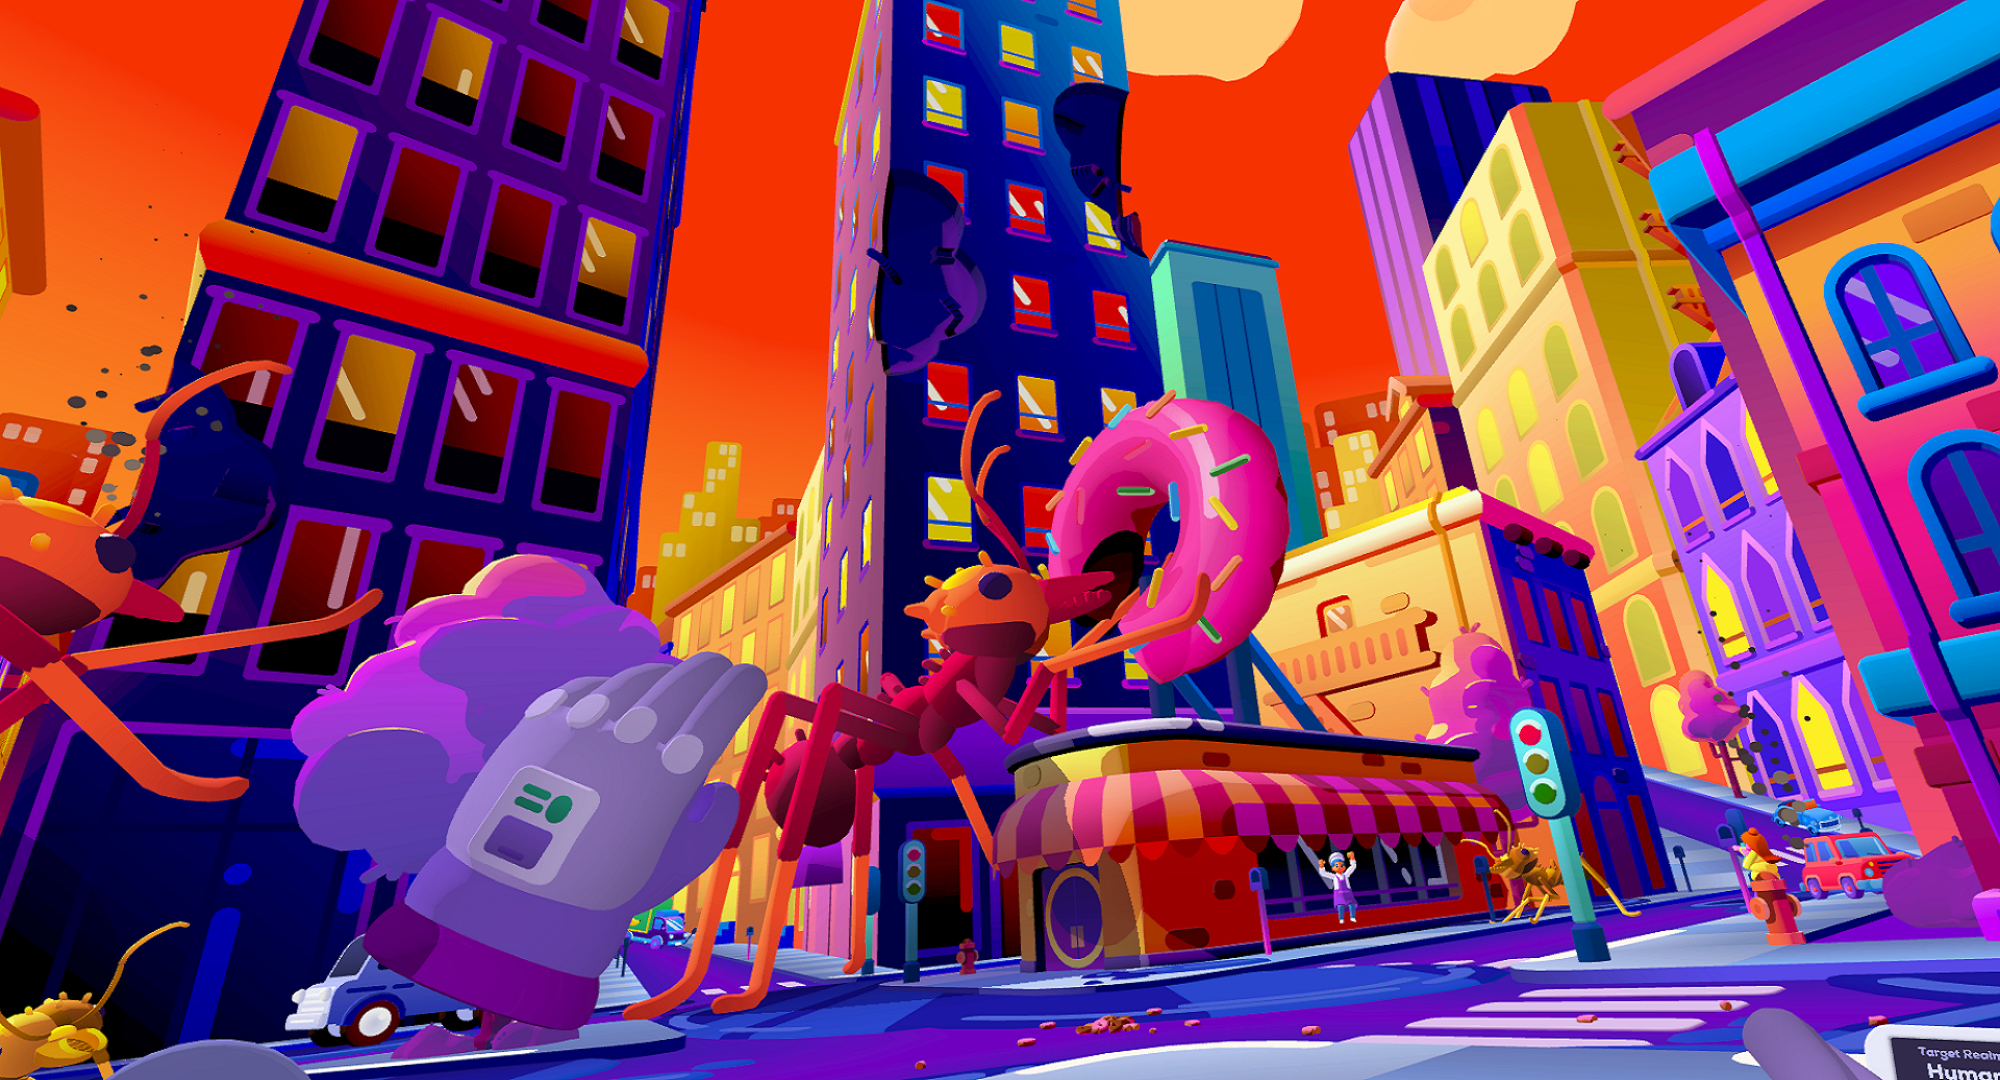 Out of Scale A Kurzgesagt Adventure what if ants were giant and took over a city